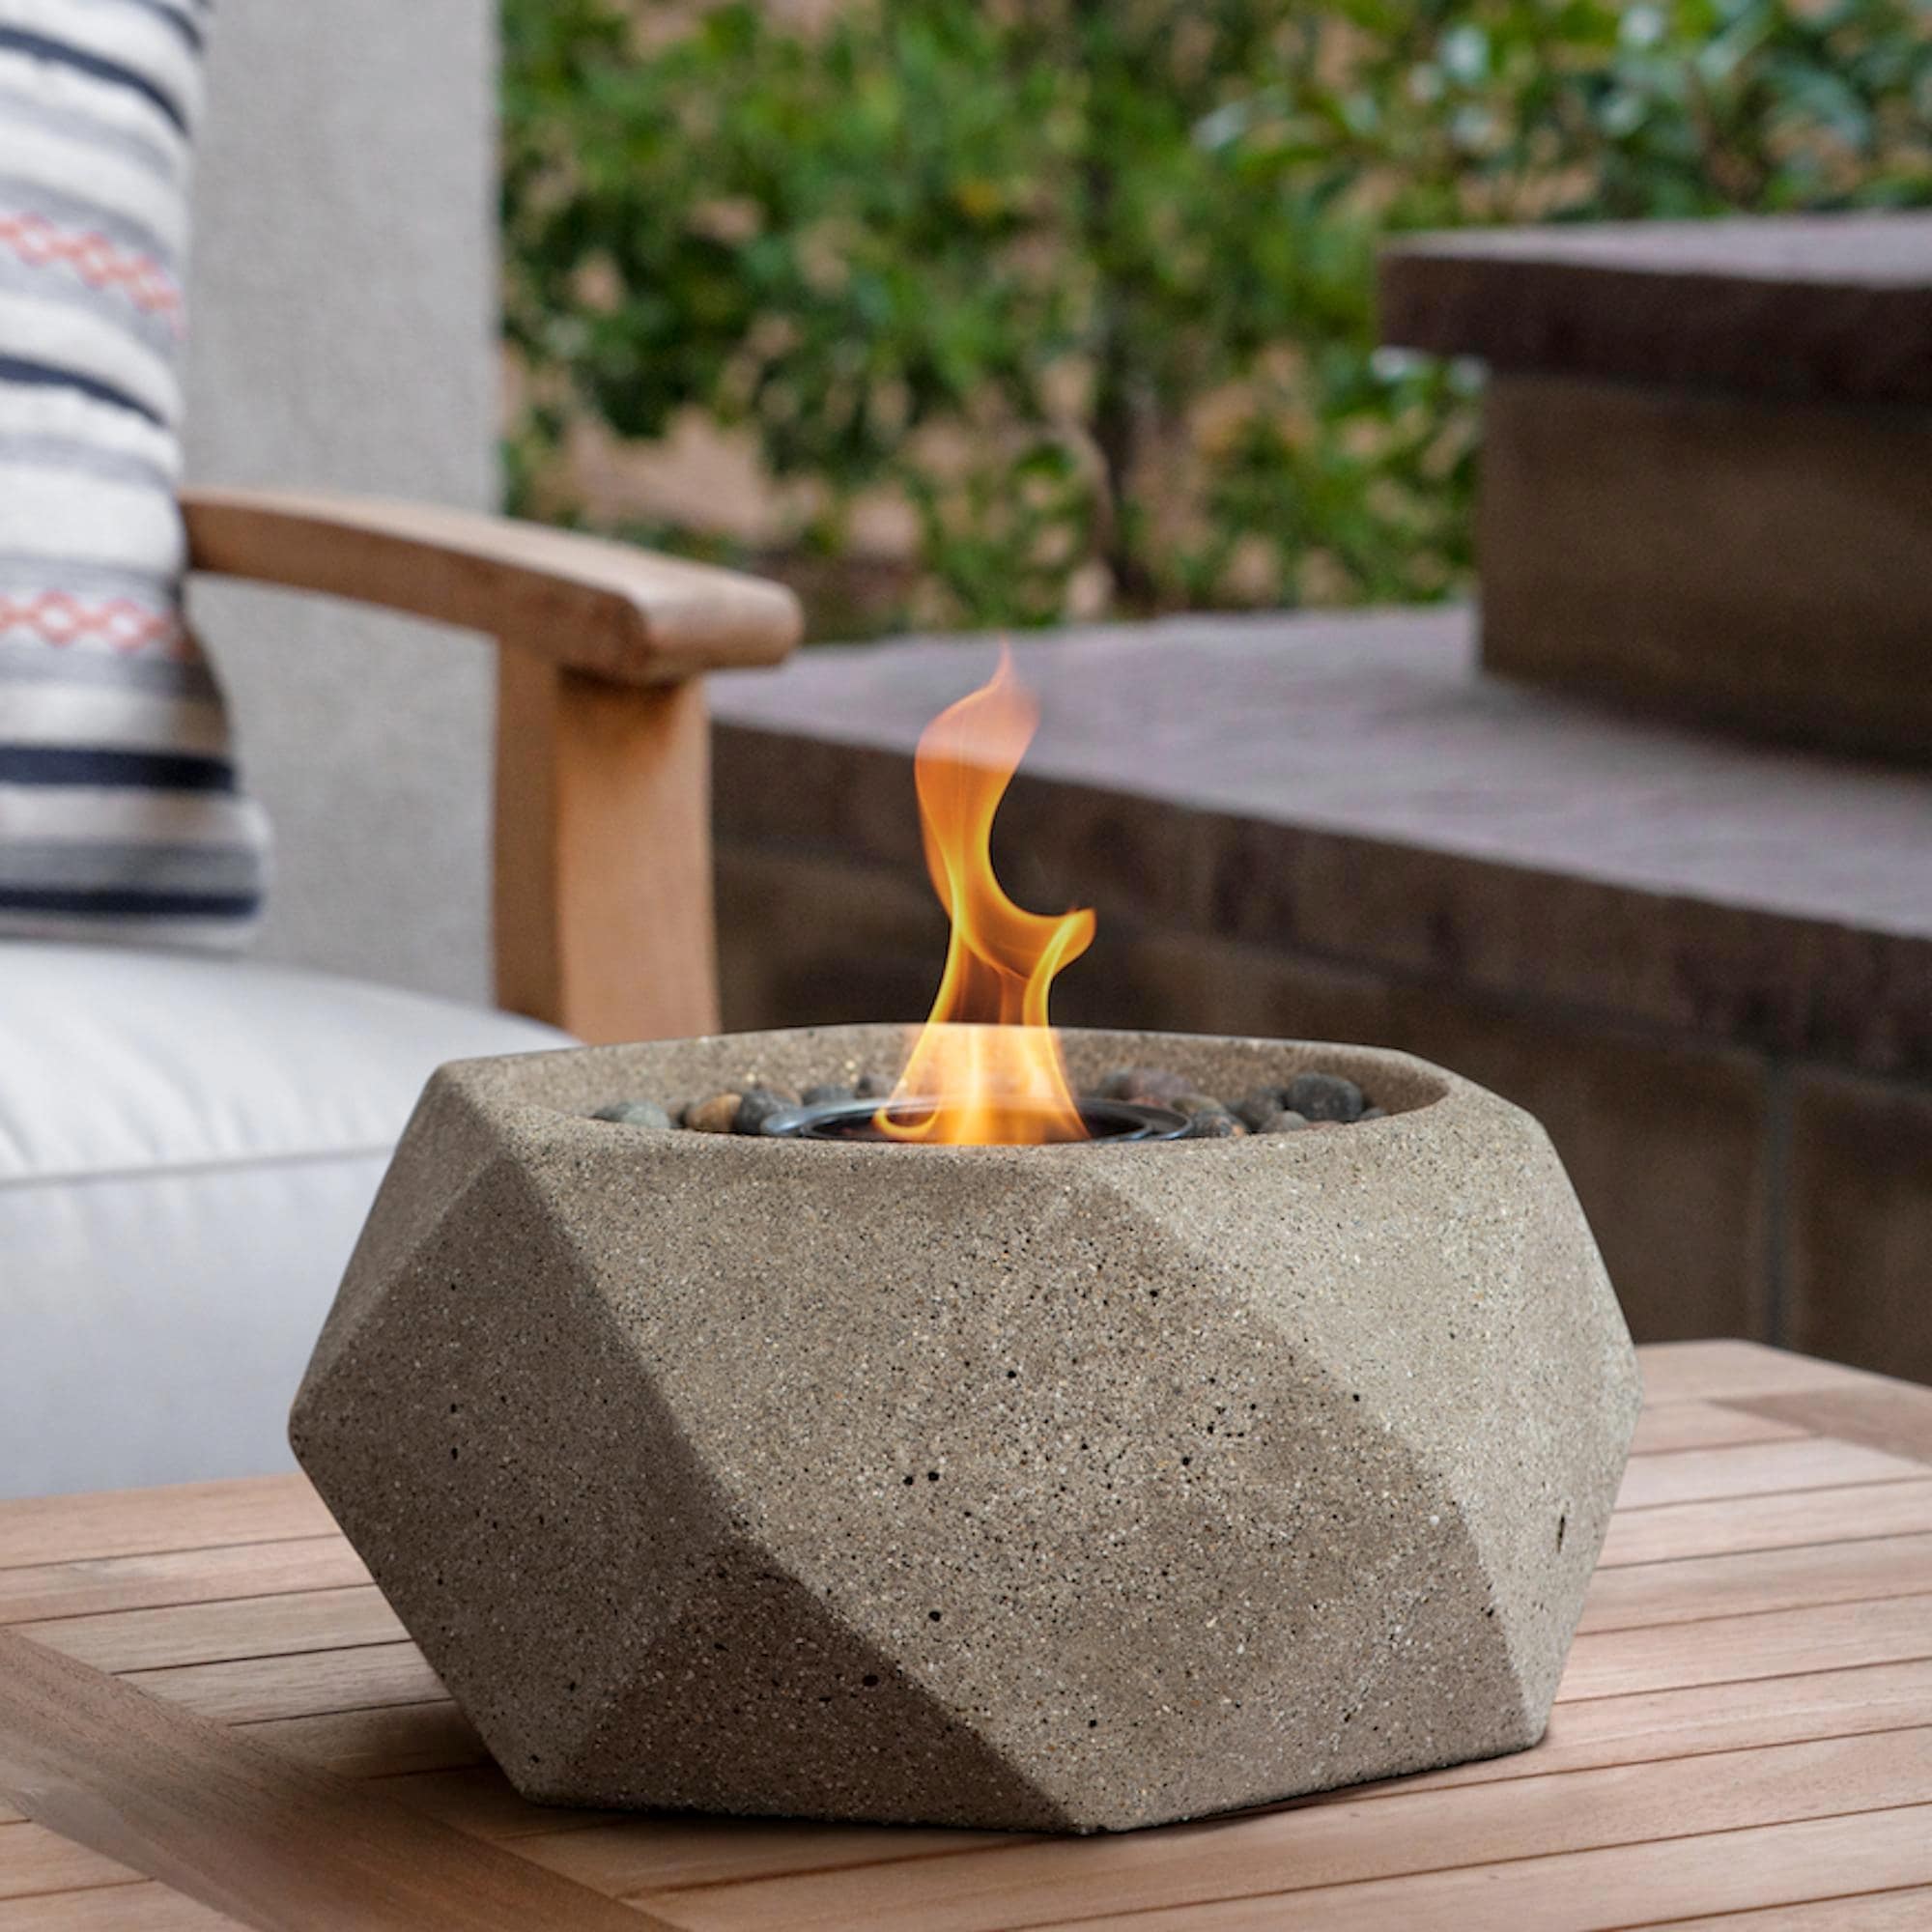 https://ak1.ostkcdn.com/images/products/is/images/direct/8ad5e0a6988ff53366d65dcecbe15fac6ffc83c3/Geo-Table-Top-Fire-Bowl.jpg